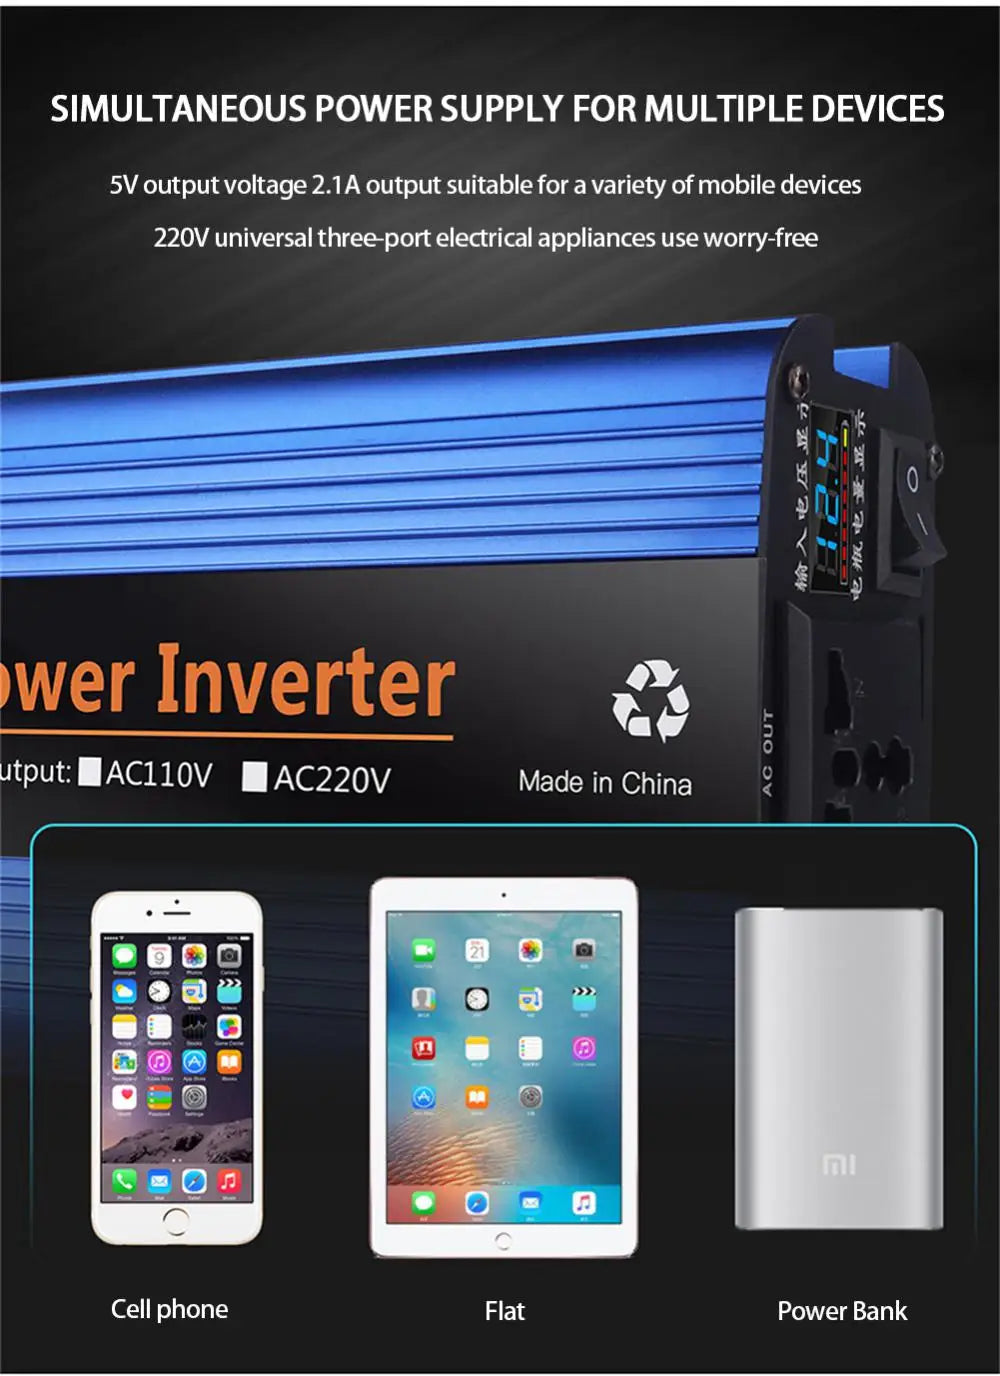 Inverter, Multi-device charger with 2.1A output and dual USB ports for phones, tablets, and more.